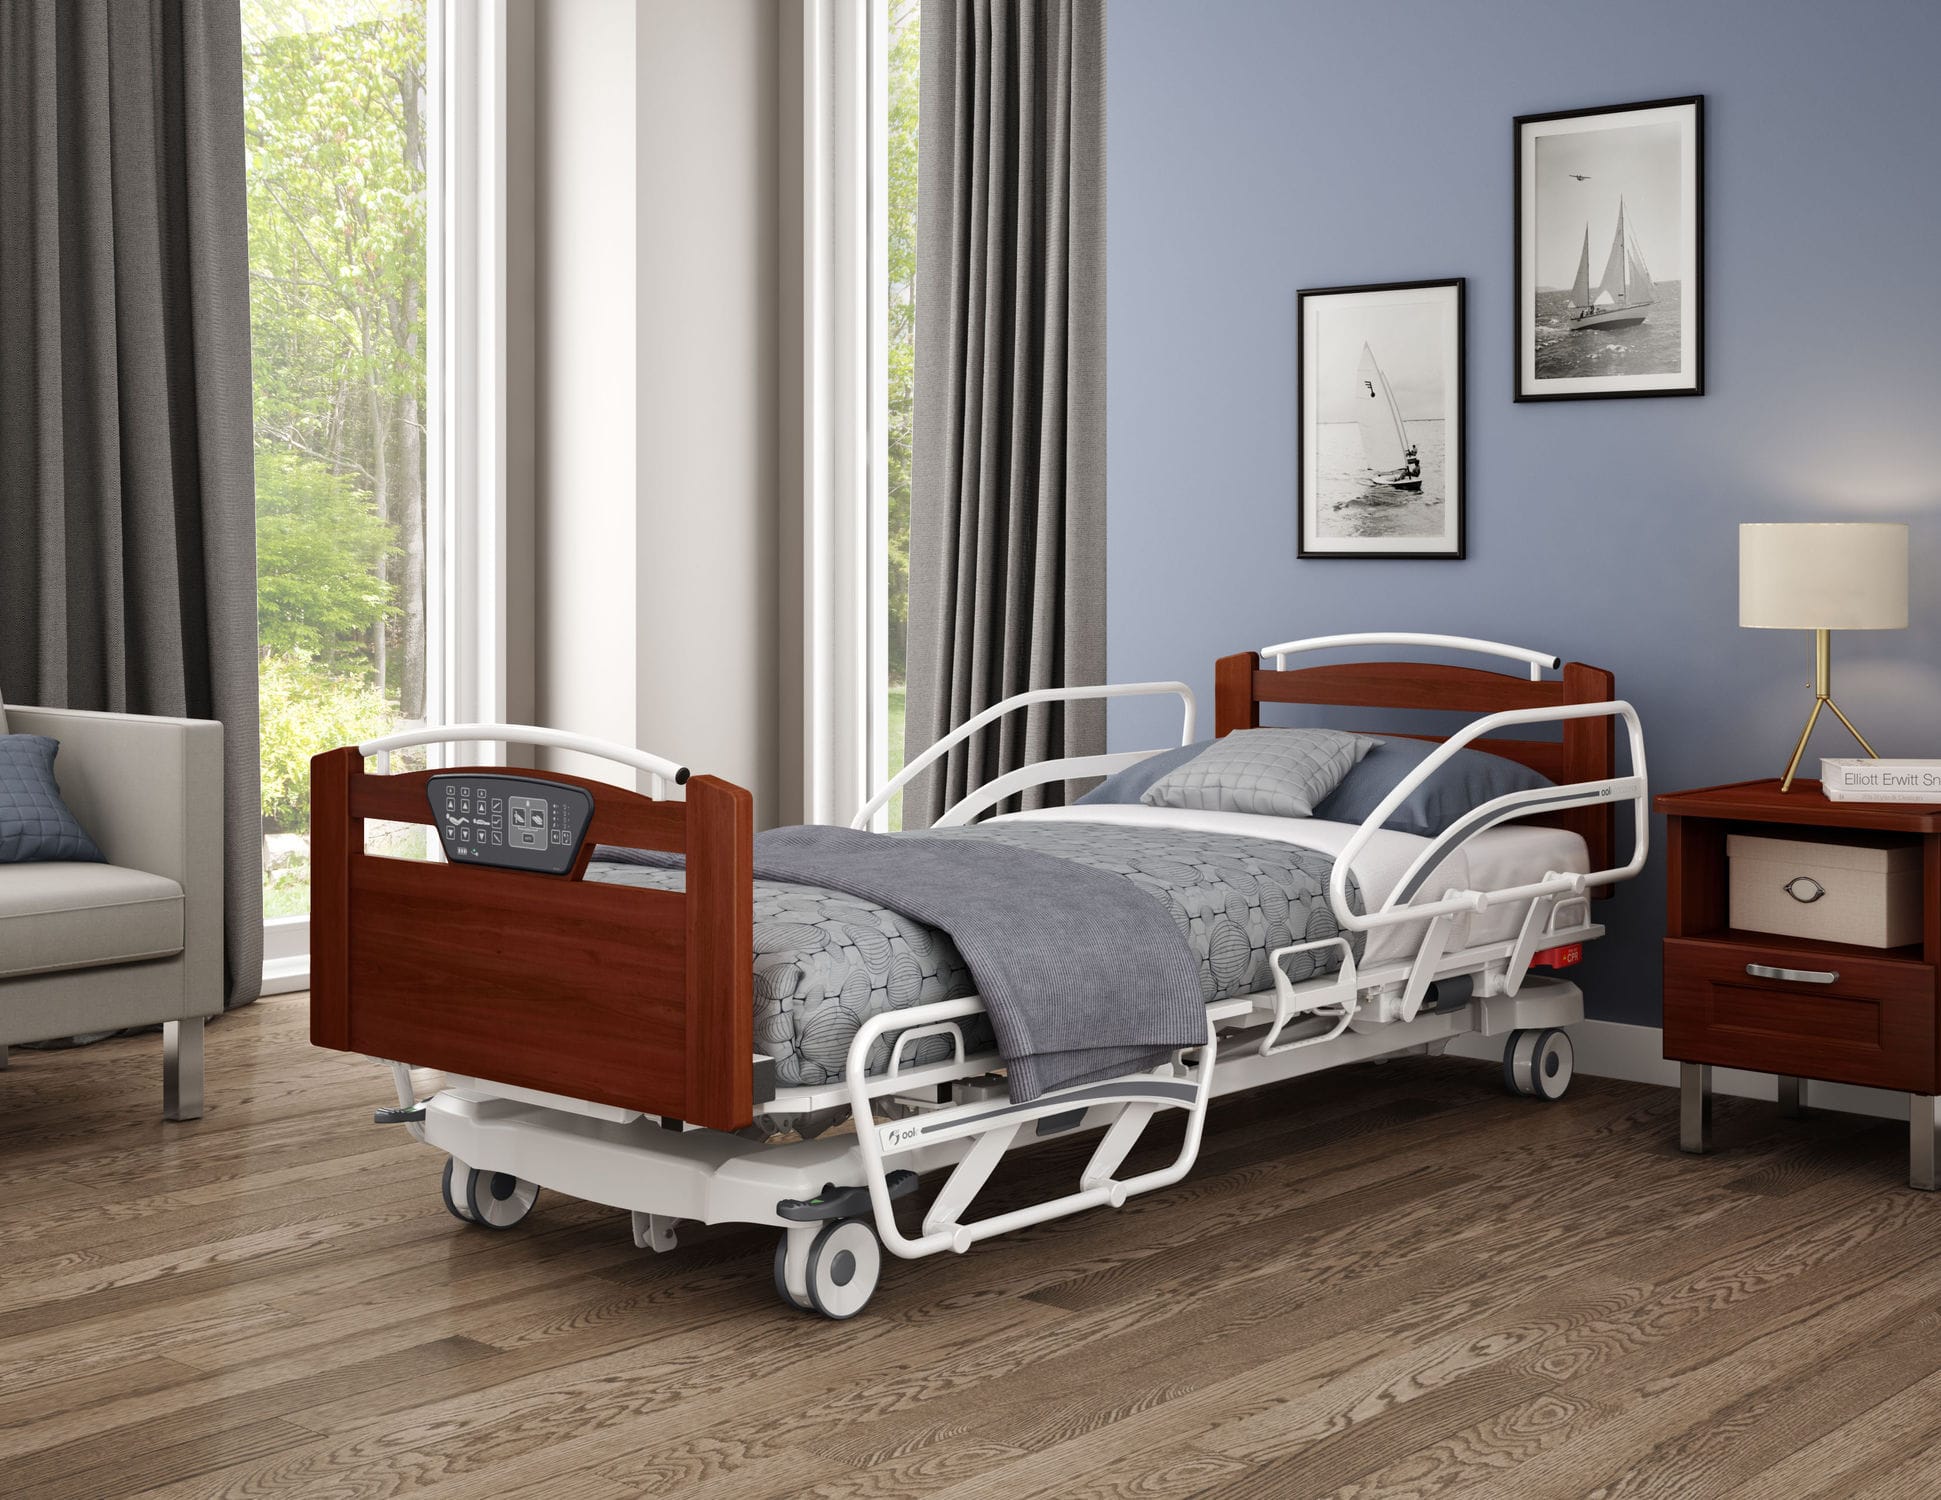 6 Factors to Consider to Ensure Your Hospital Bed Rental is Perfectly Suited for Your Needs